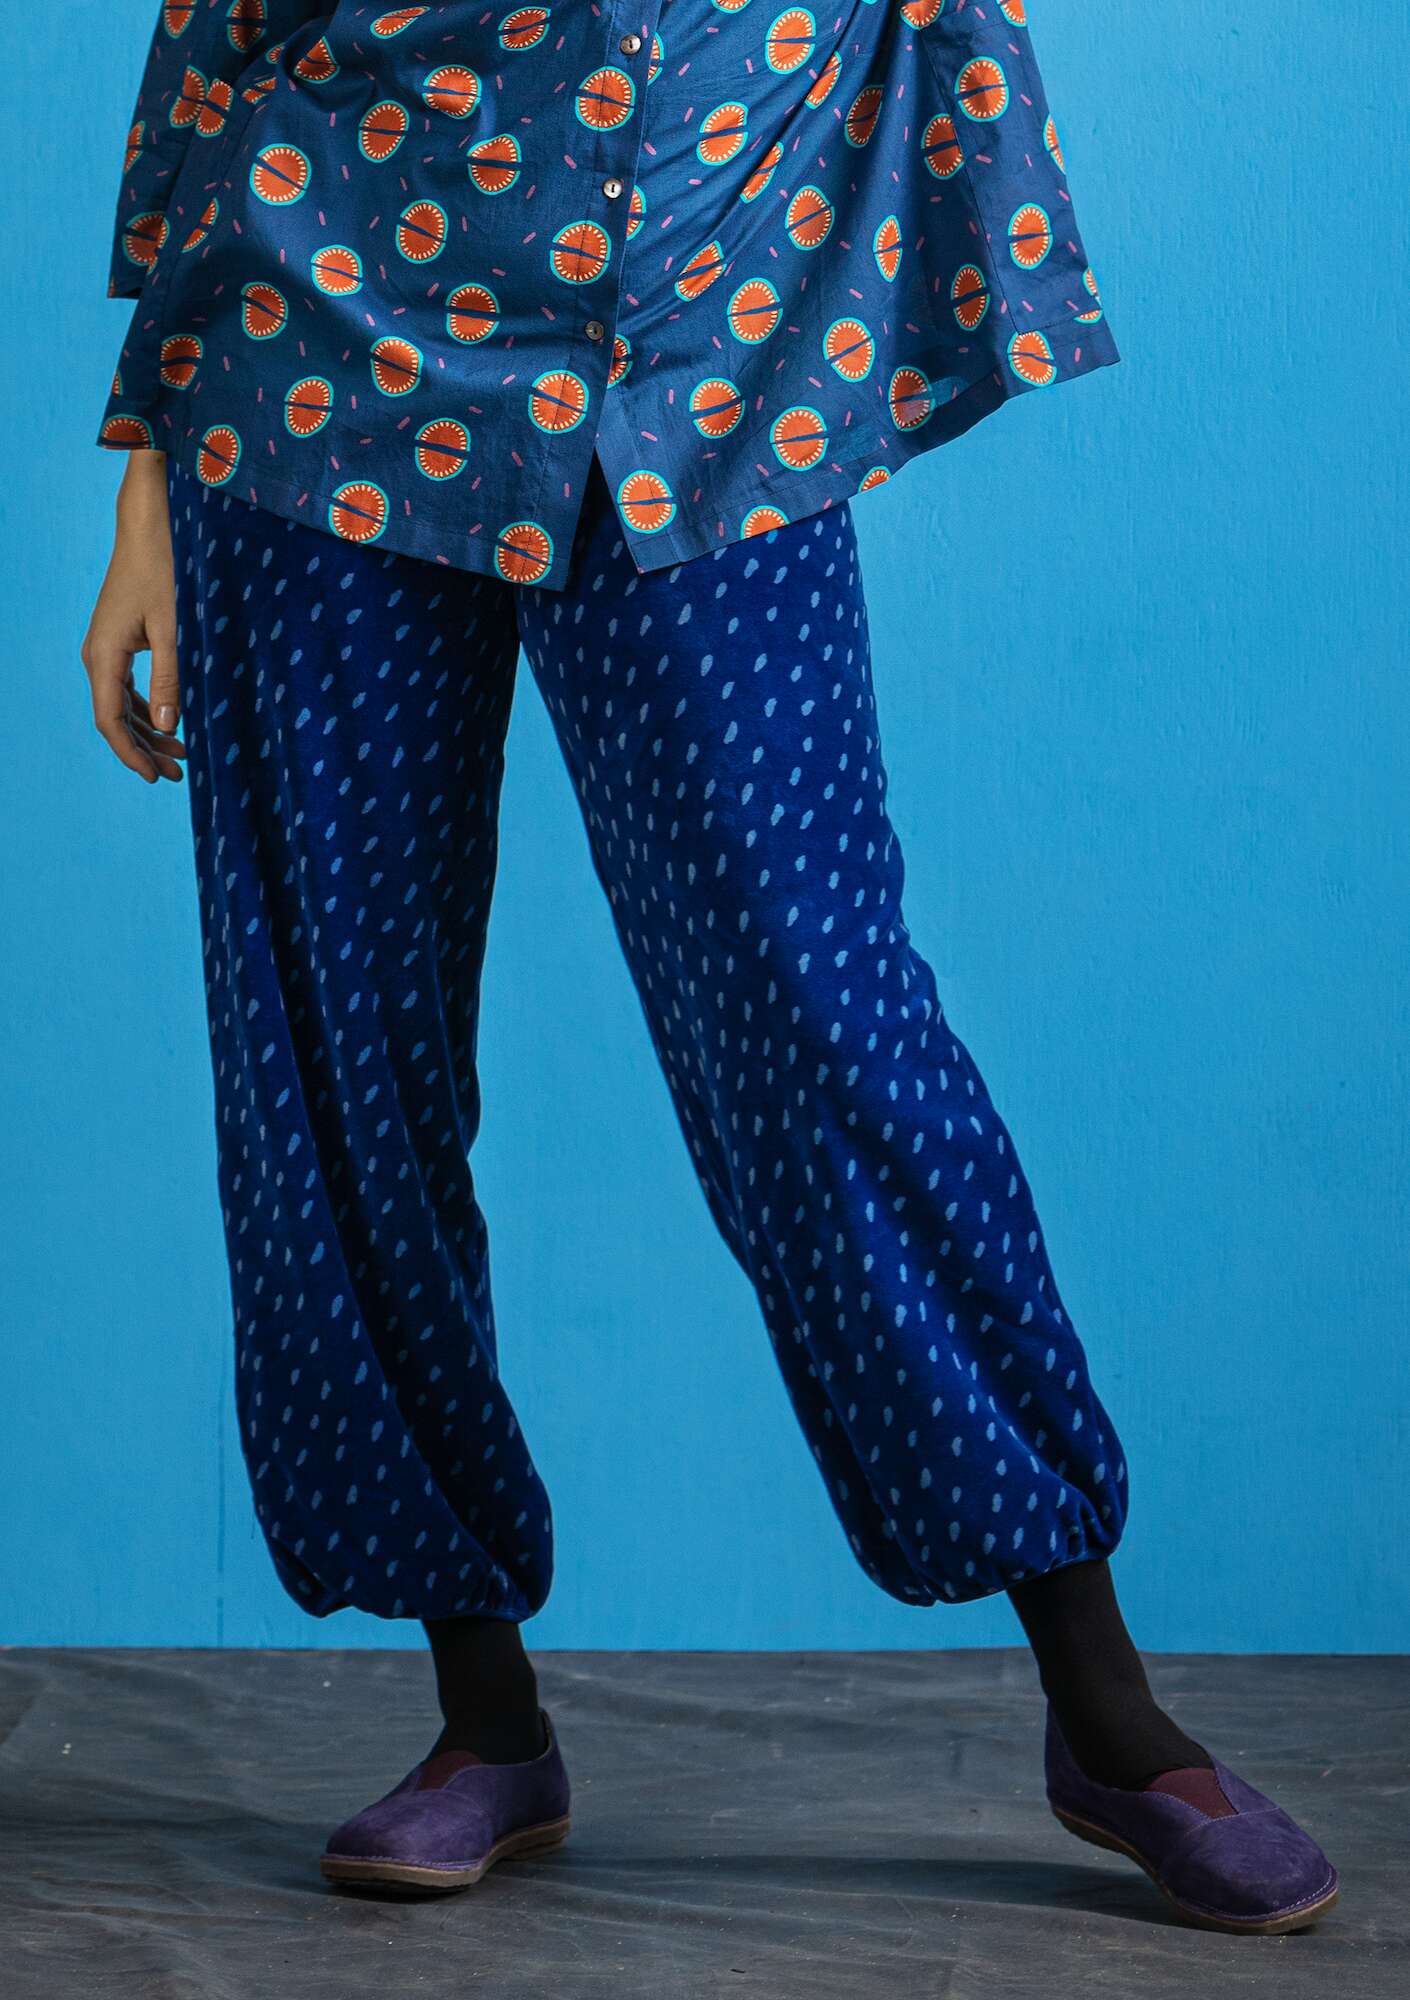 “Fauna” velour pants in organic cotton/recycled polyester indigo blue/patterned thumbnail